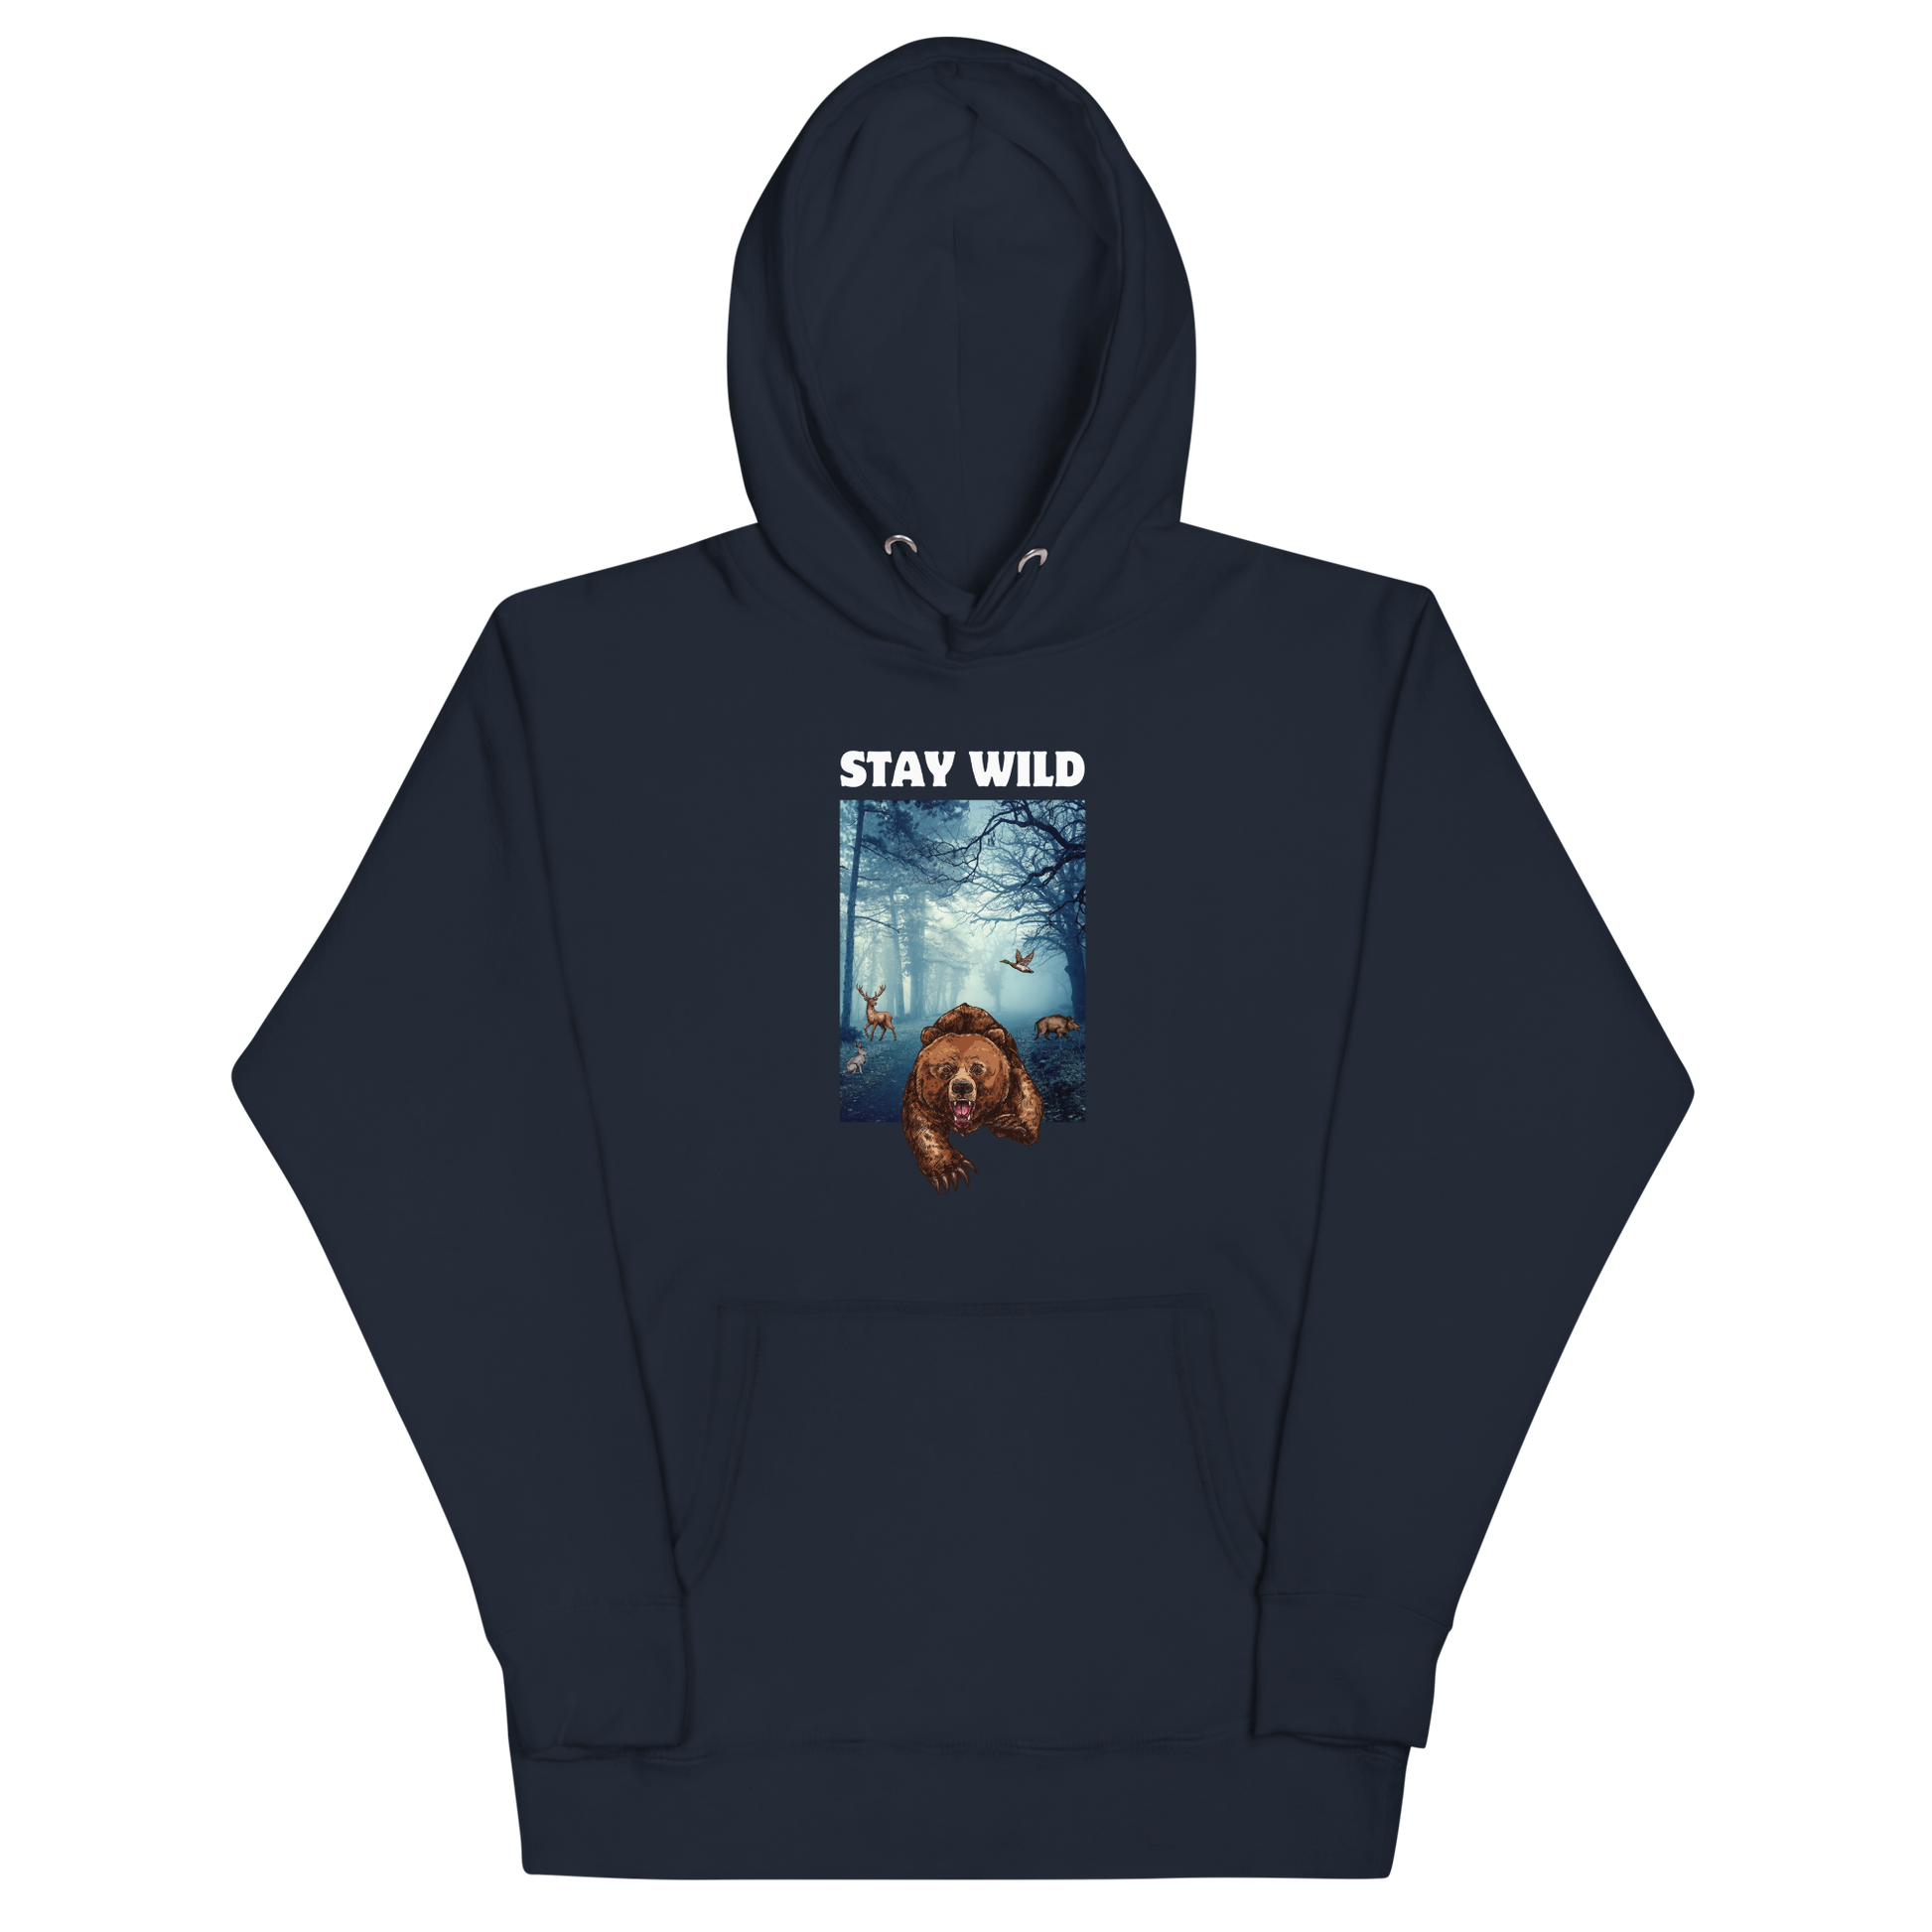 Navy Blazer Premium Bear Hoodie featuring a Stay Wild graphic on the chest - Cool Graphic Bear Hoodies - Boozy Fox